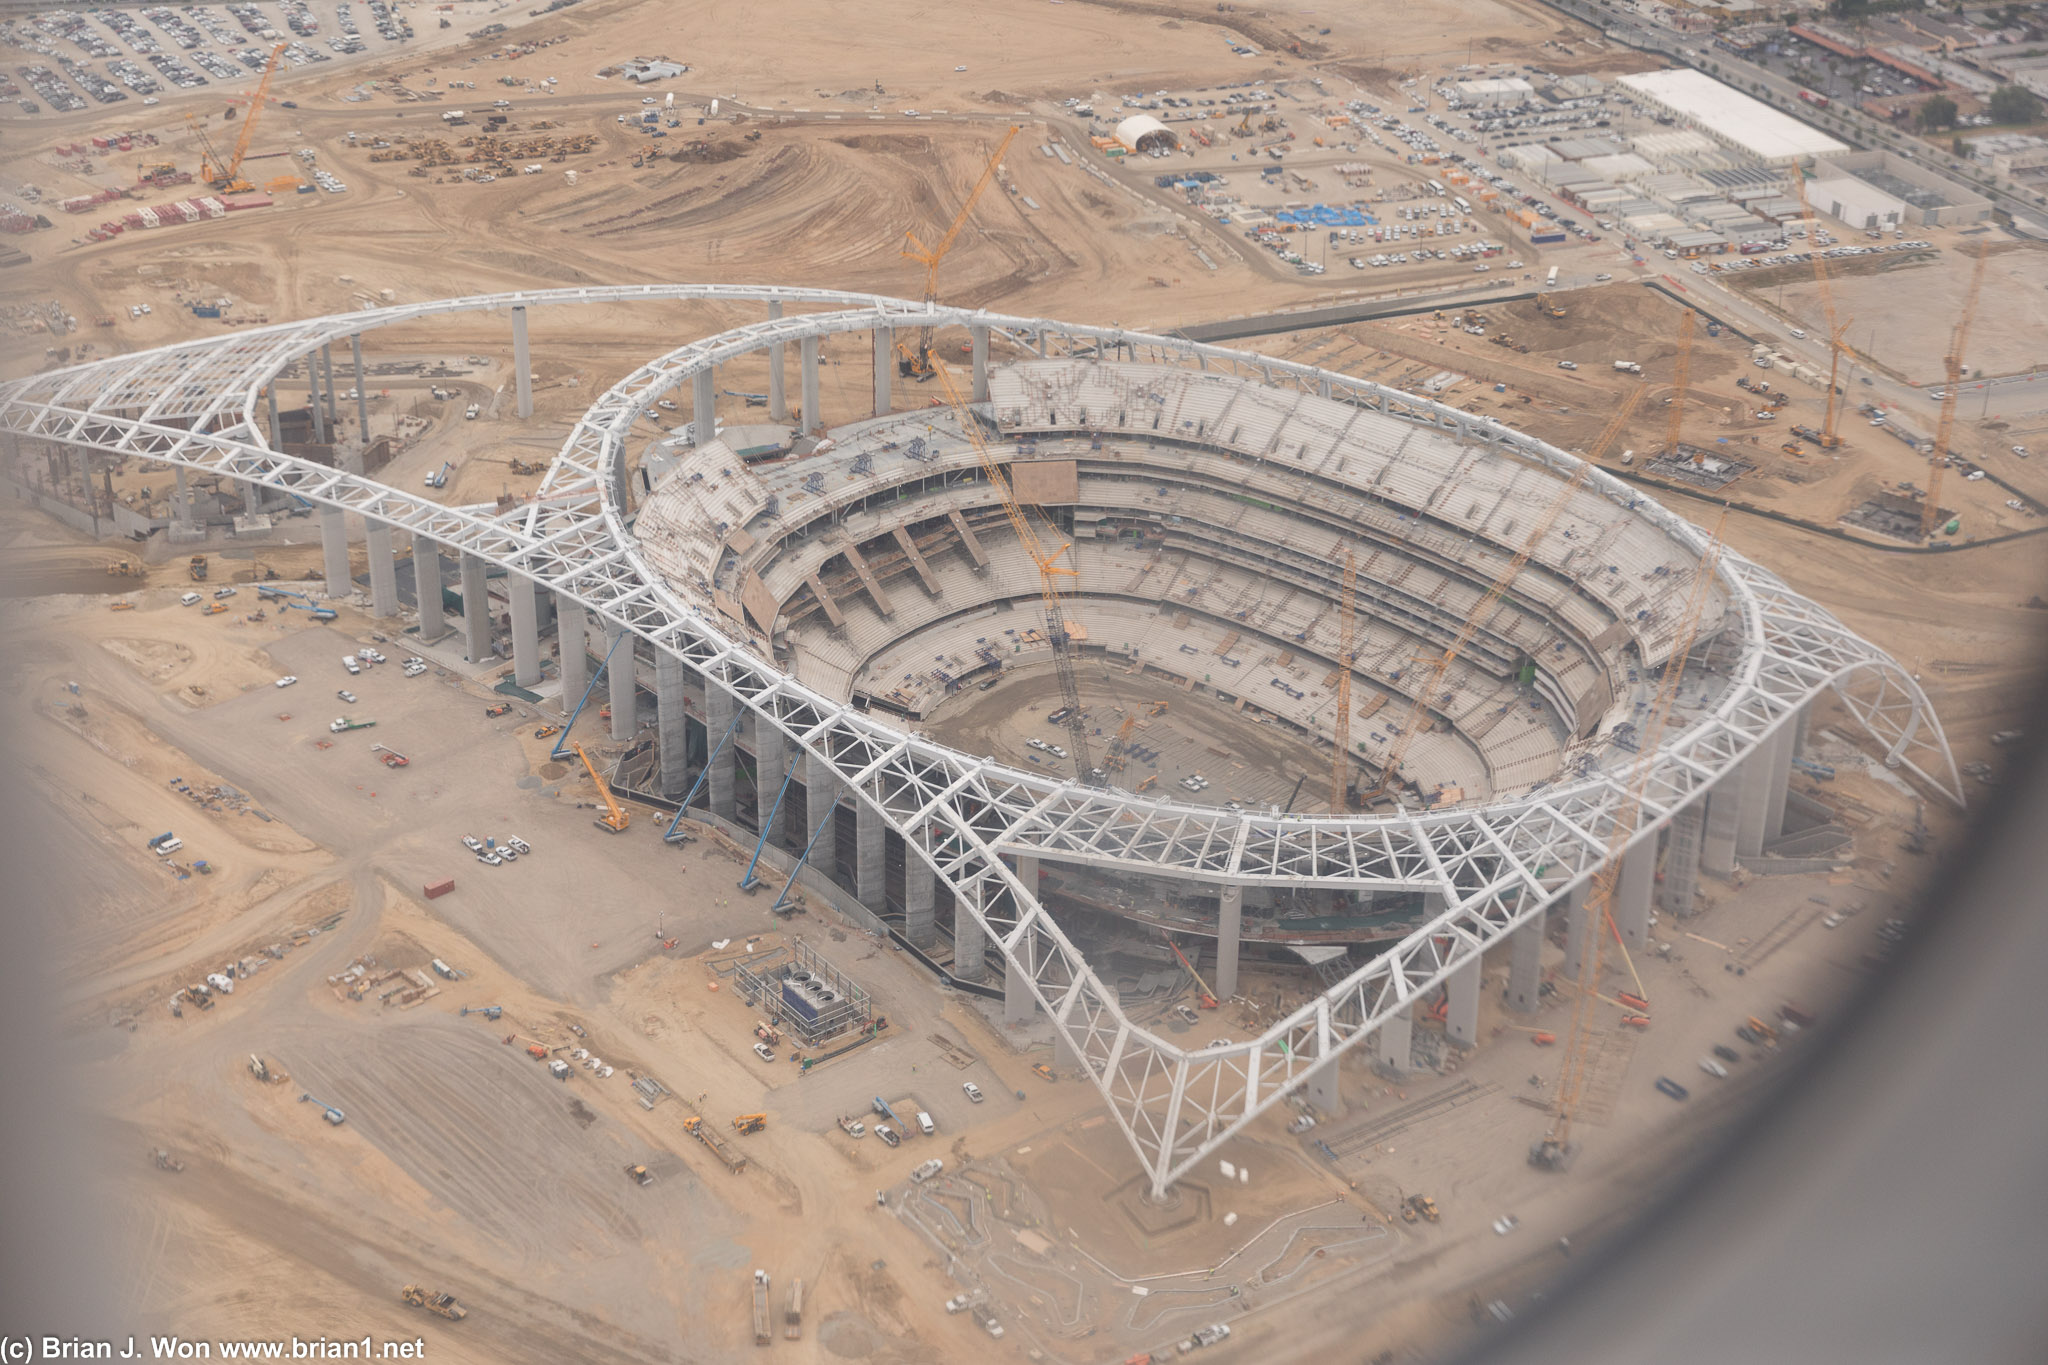 New Los Angeles Stadium, future home of the Rams and Chargers, is looking good.